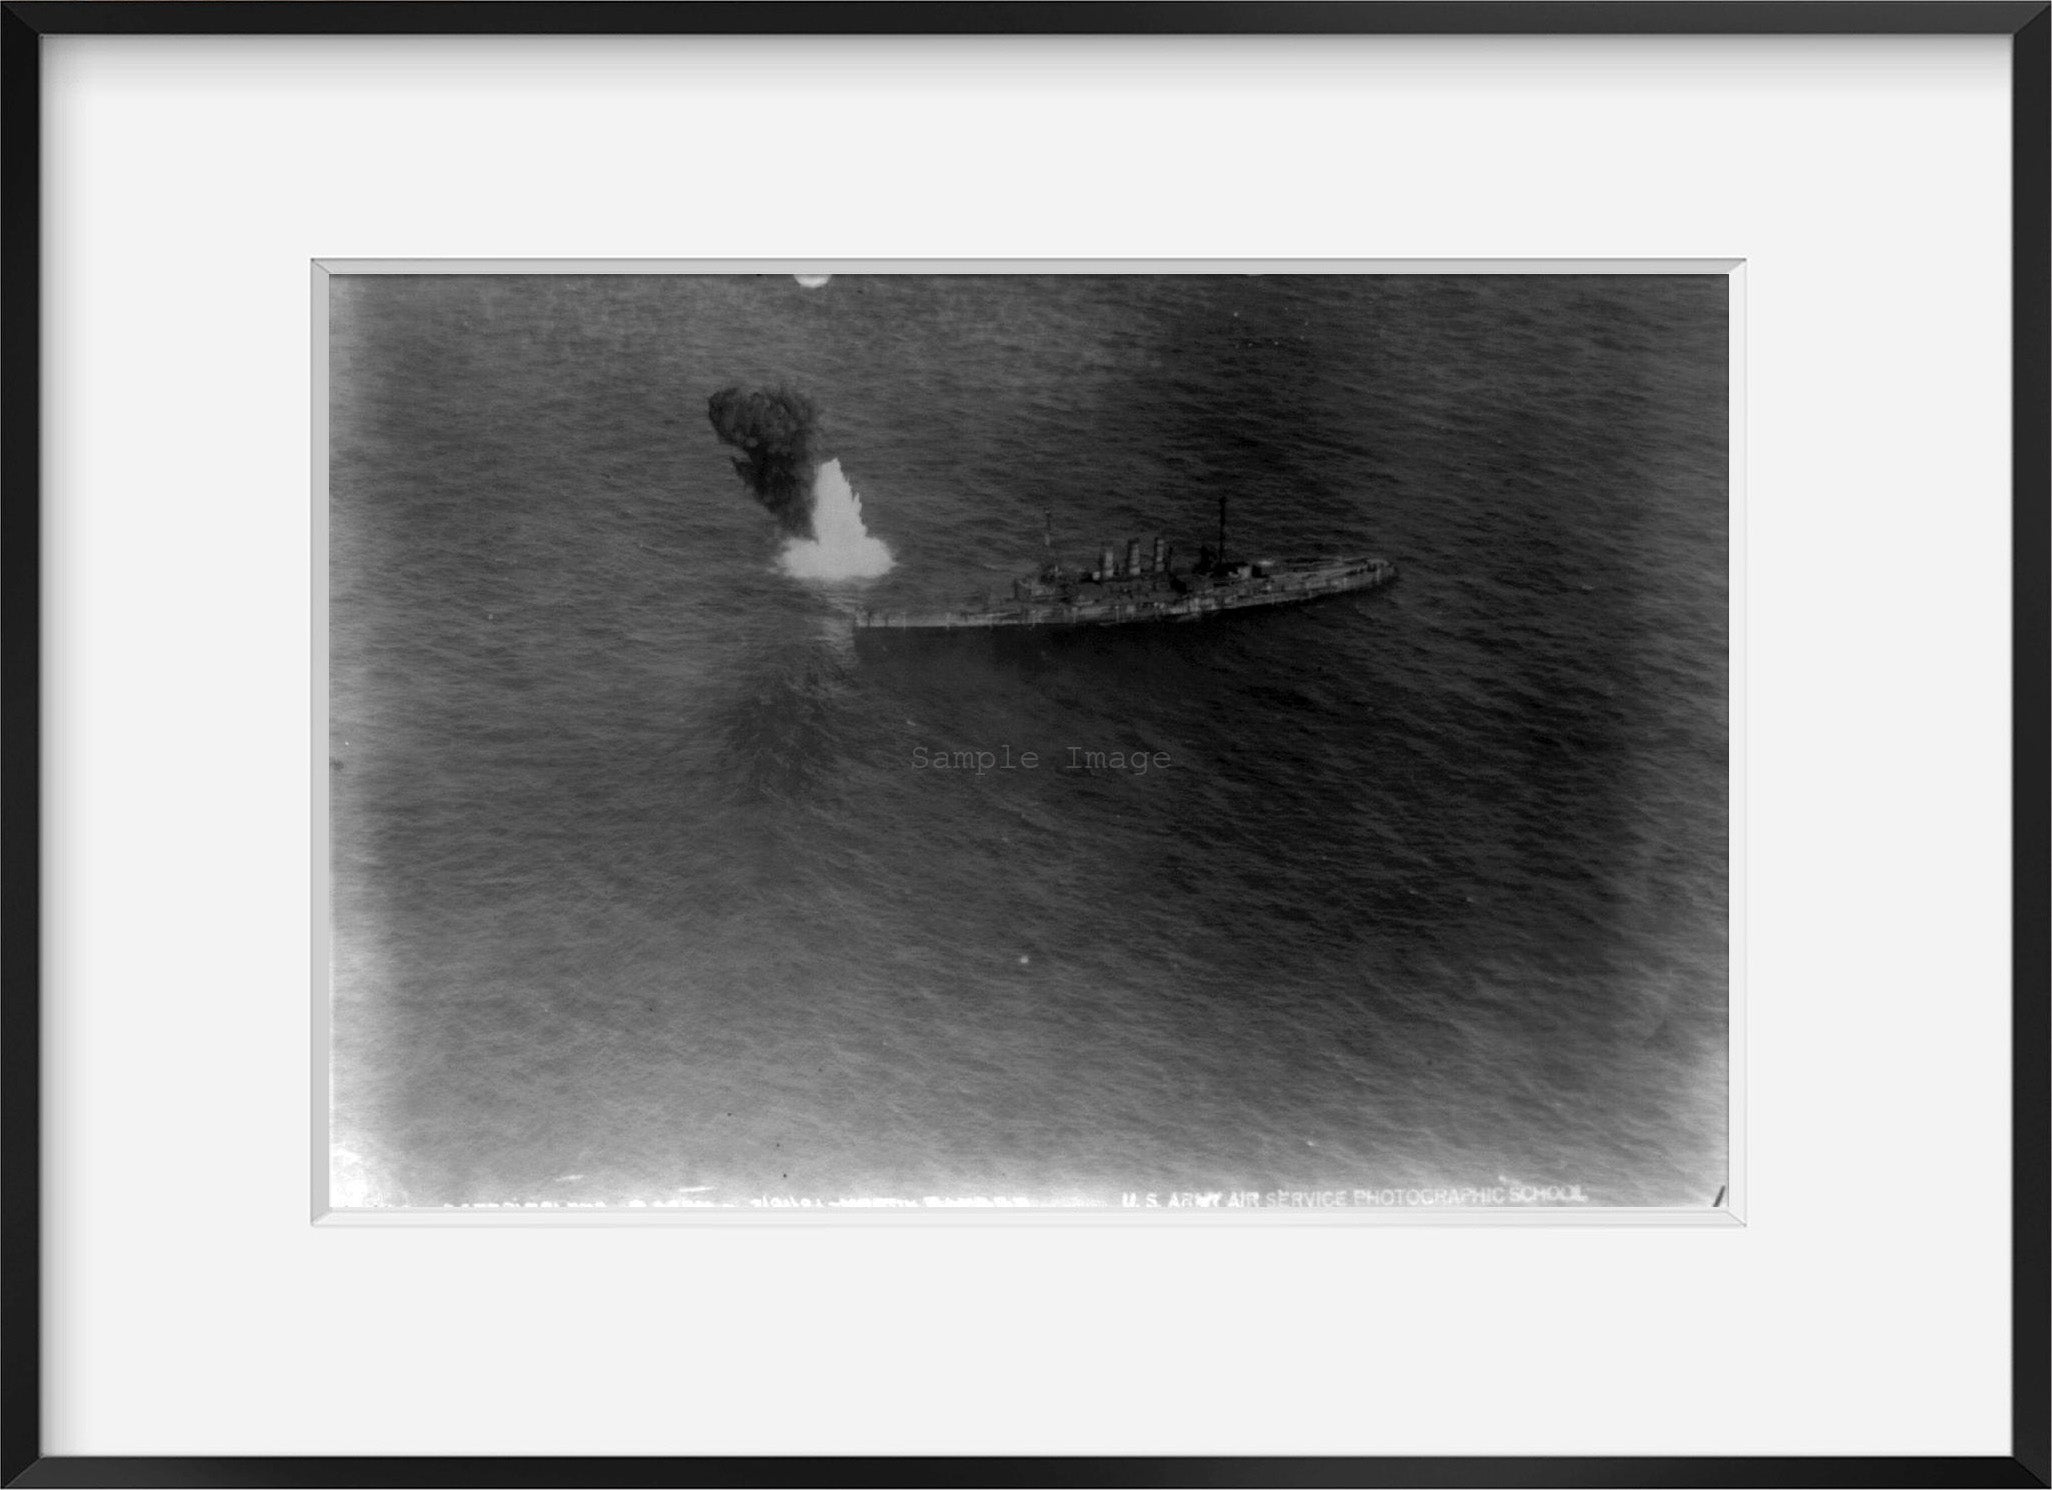 1921 July 21 photograph of Bombing the Ostfriesland, July 21, 1921